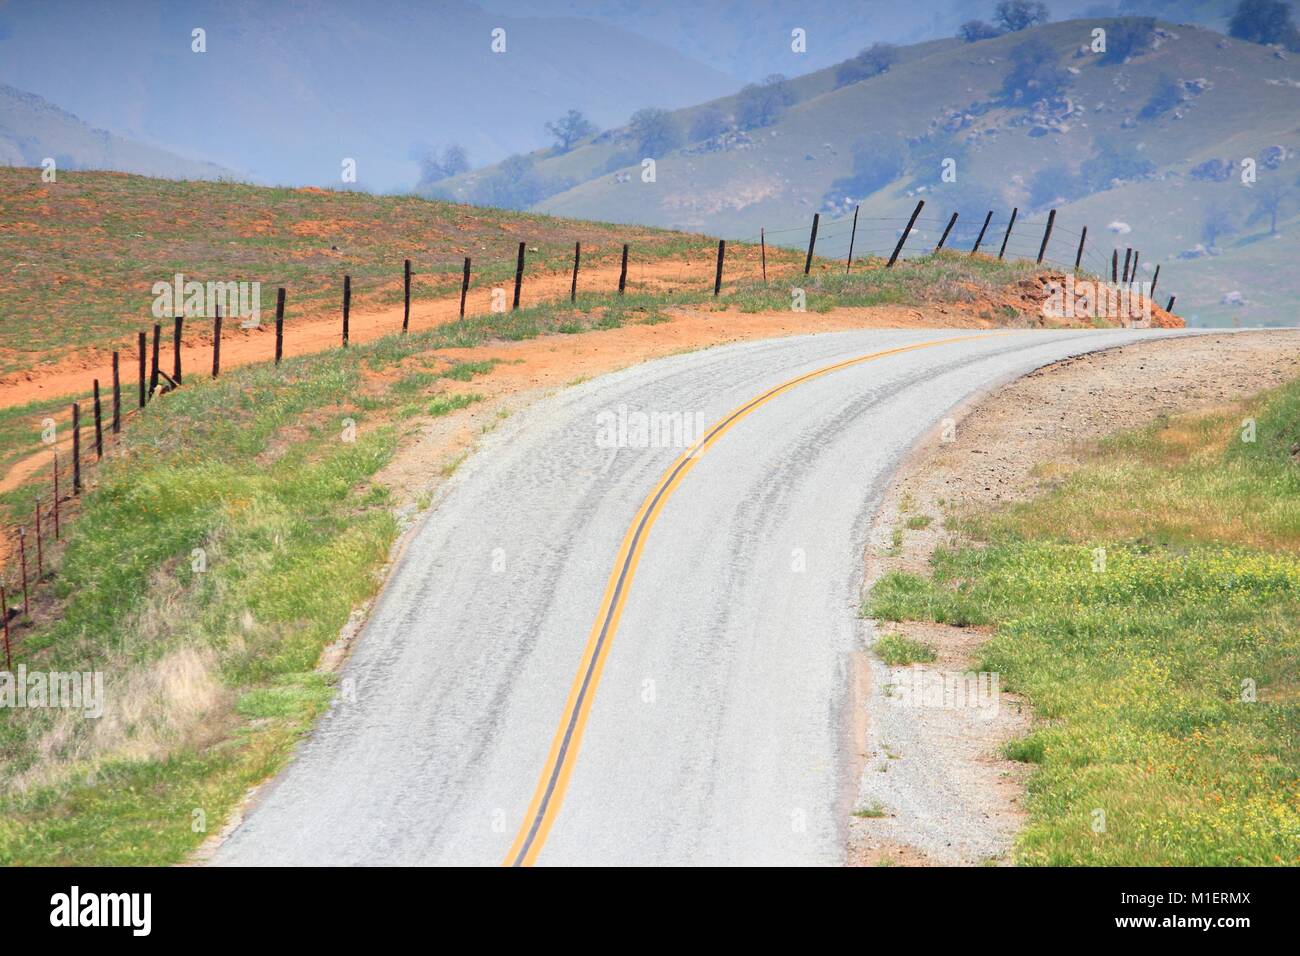 California, United States - winding road in countryside landscape of Tulare County. Stock Photo